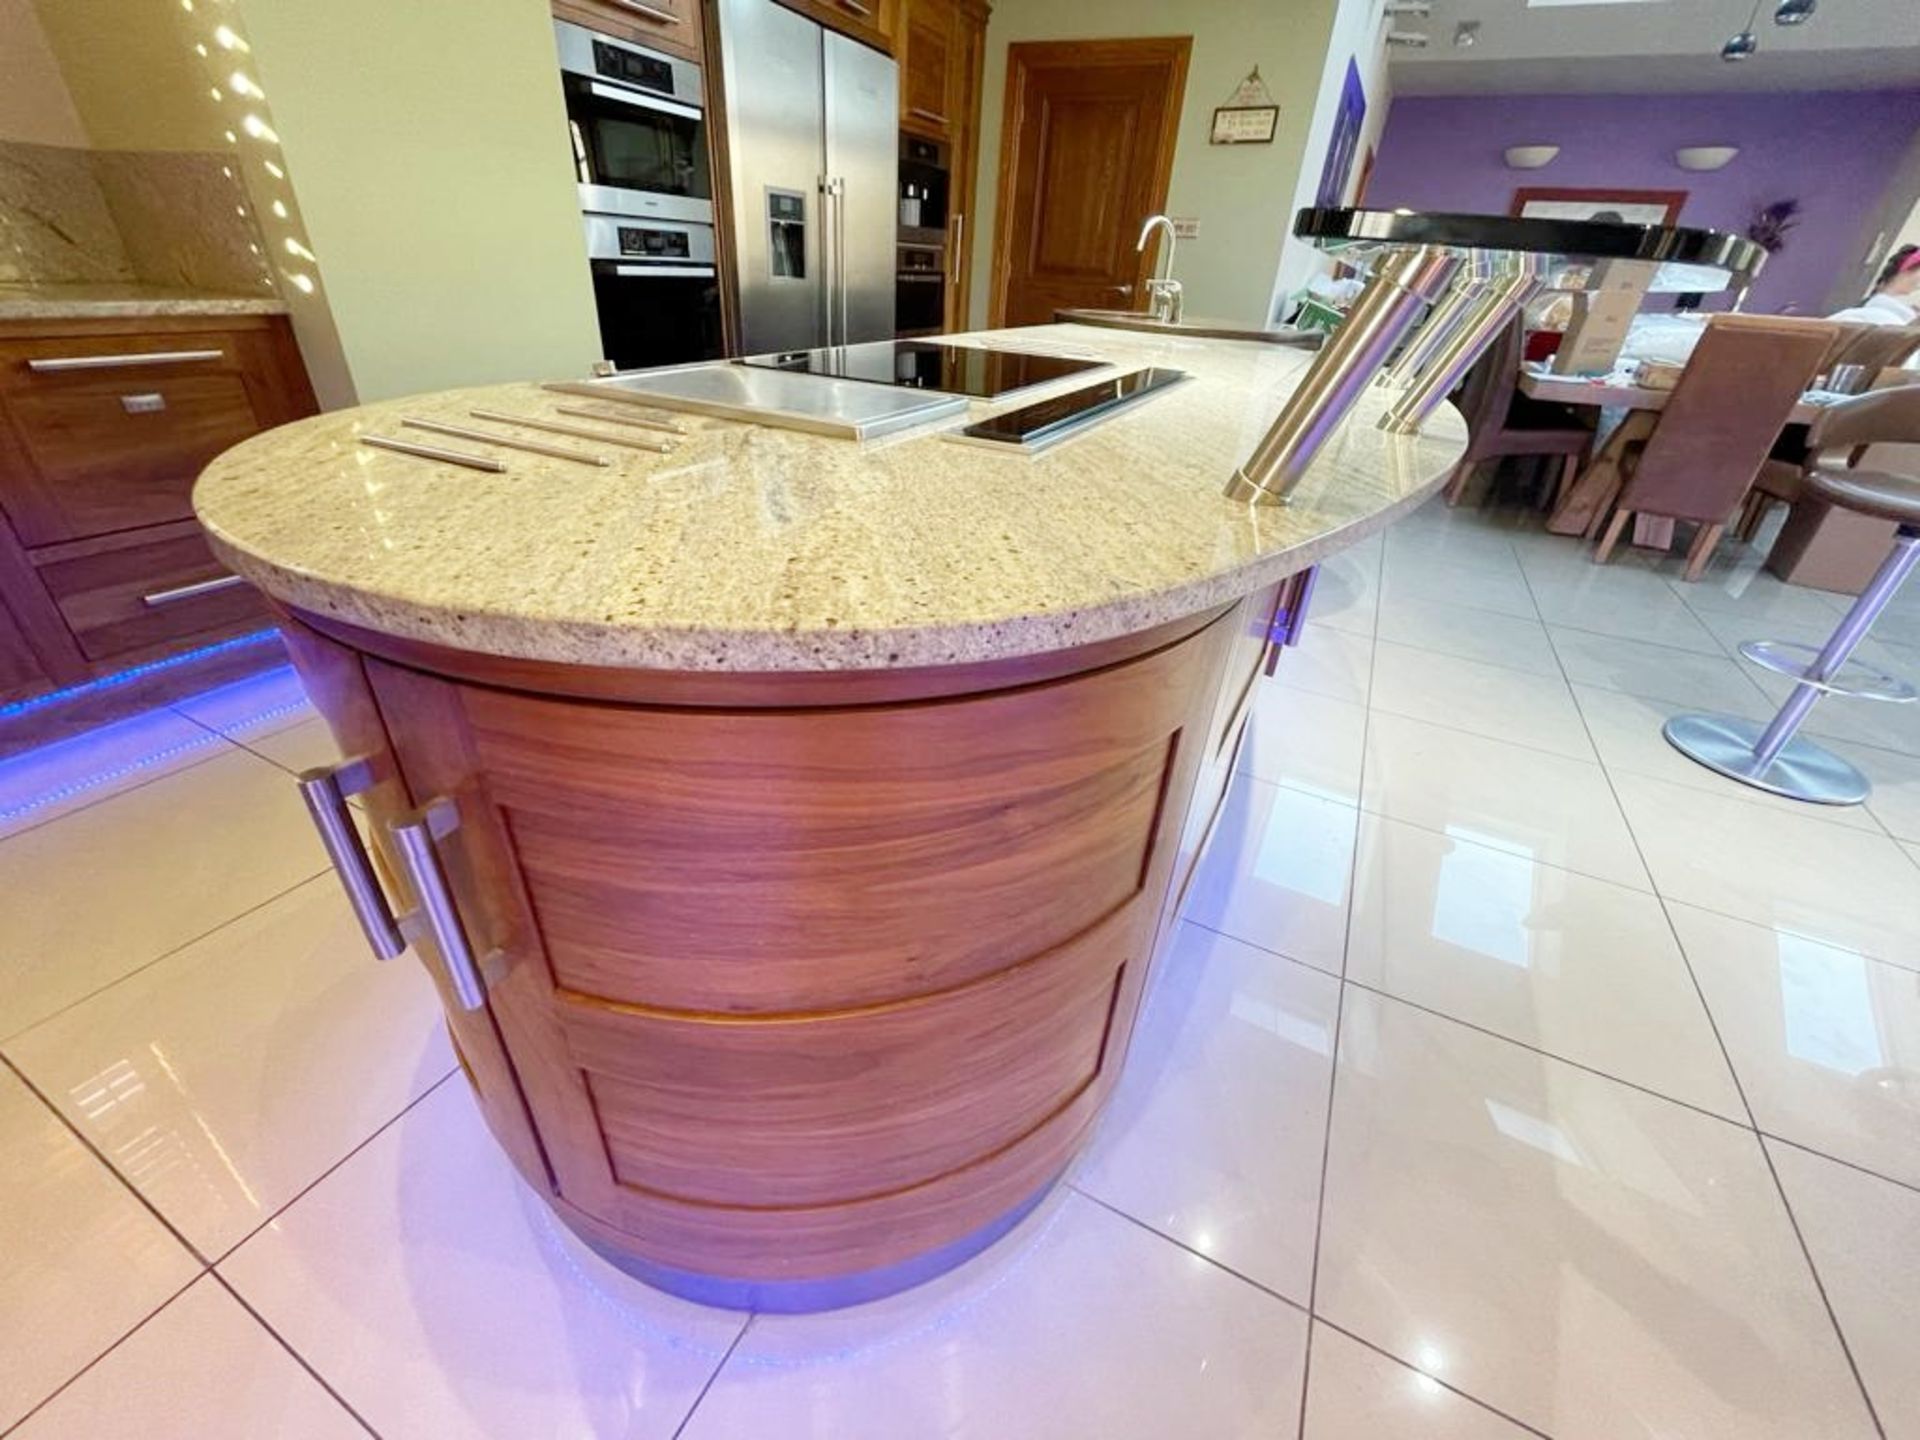 1 x Bespoke Curved Fitted Kitchen With Solid Wood Walnut Doors, Integrated Appliances, Granite Tops - Image 128 of 147